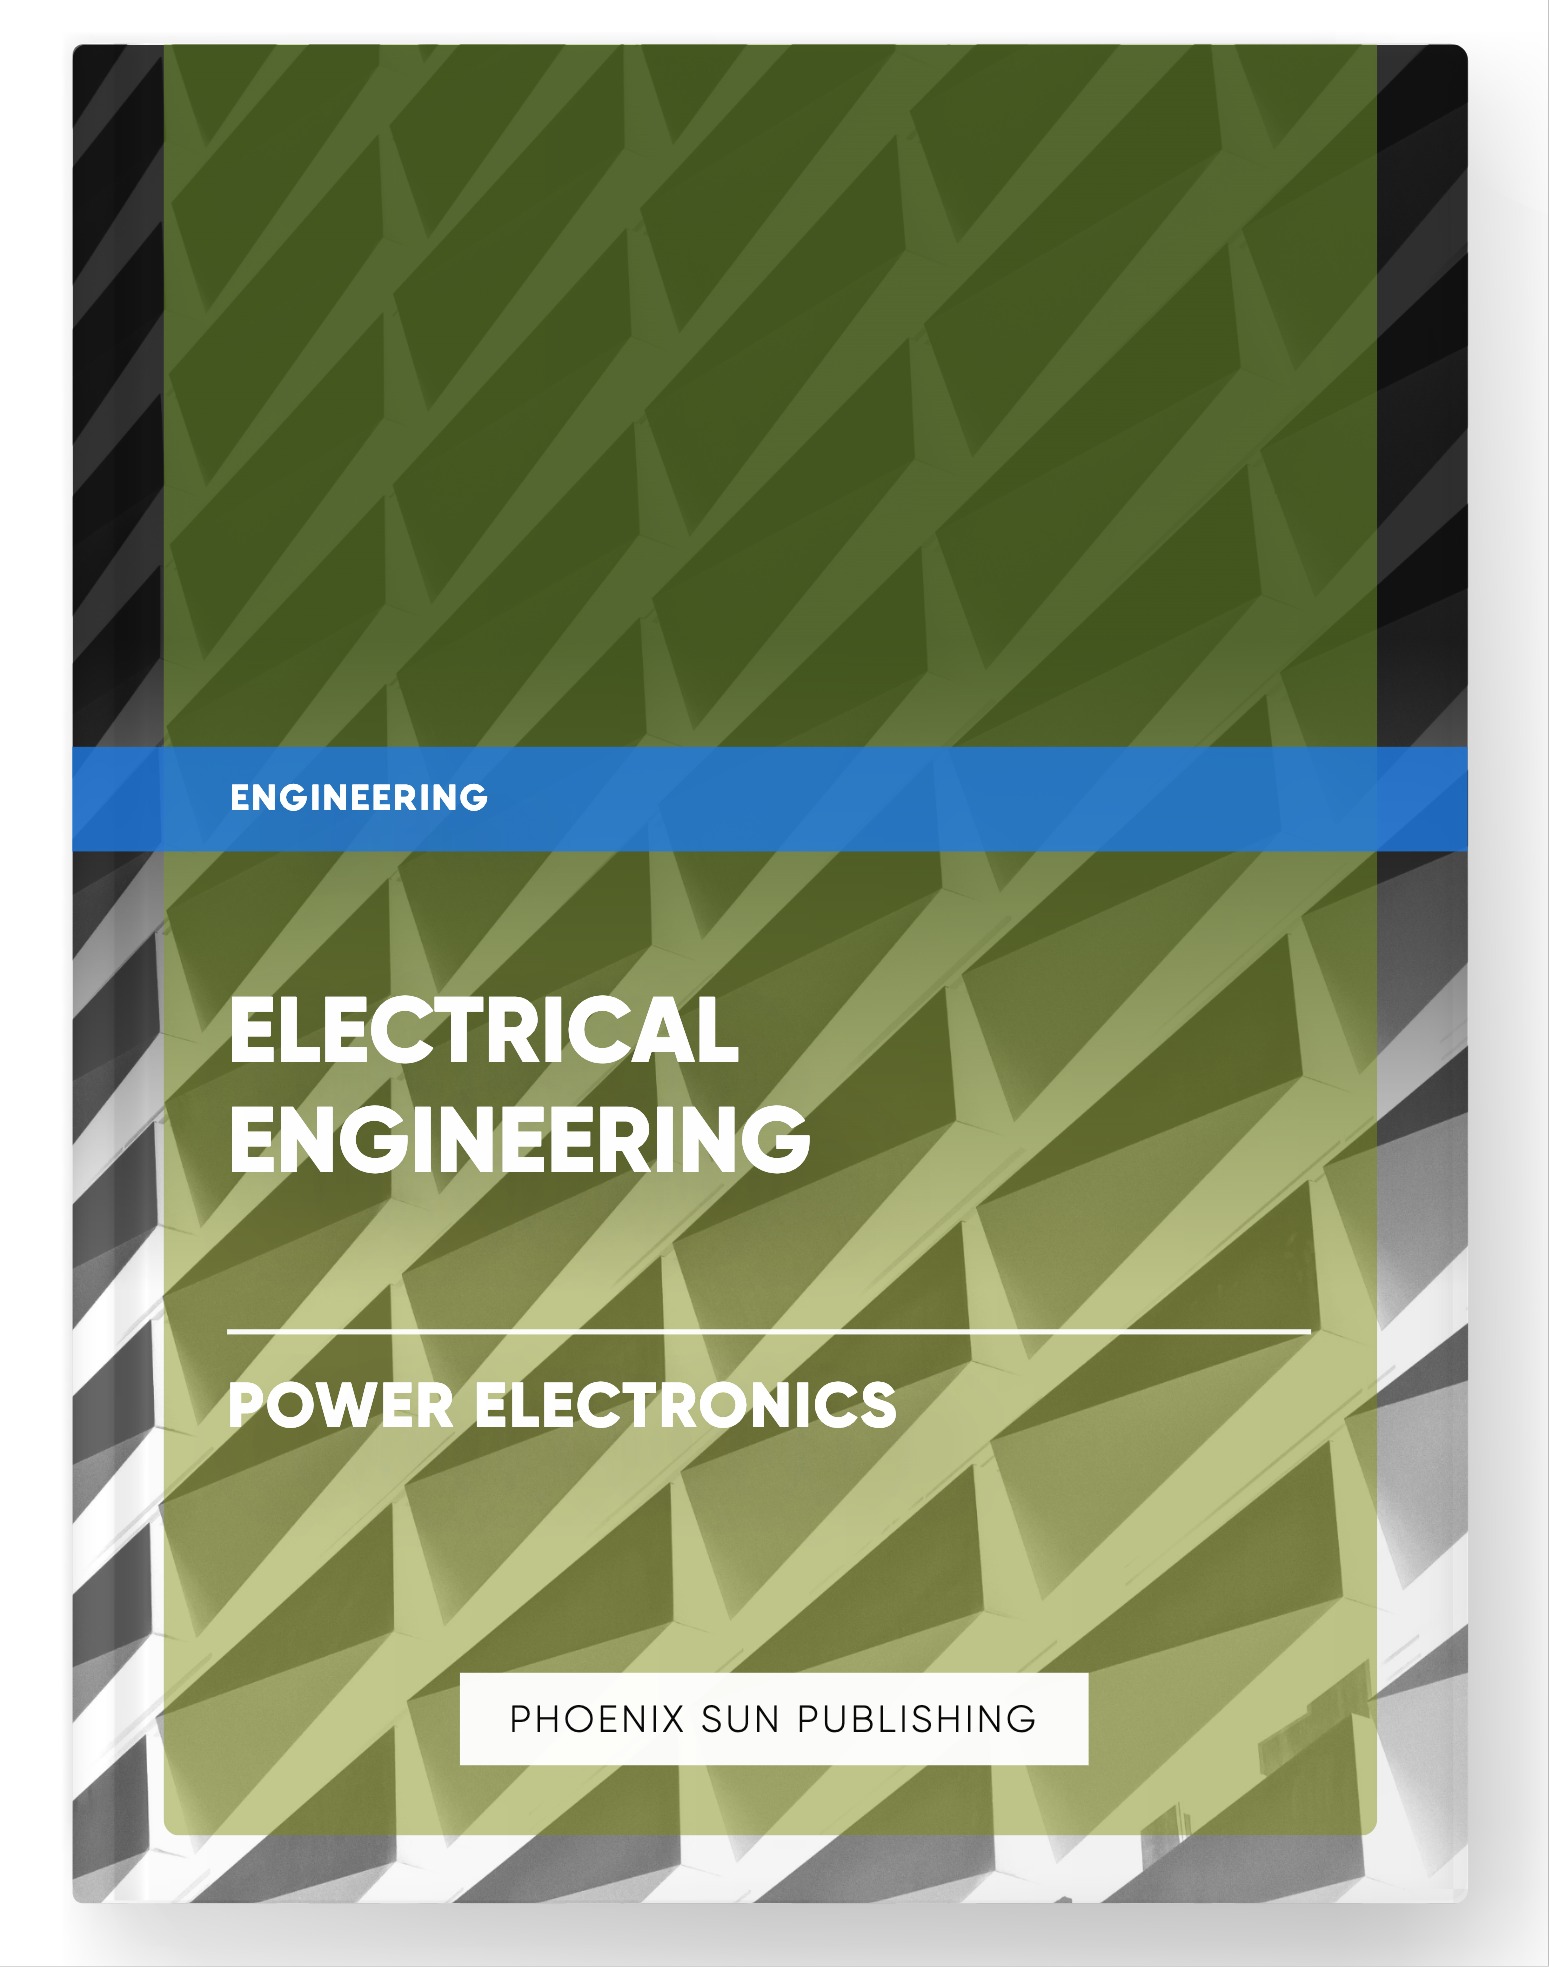 Electrical Engineering – Power Electronics